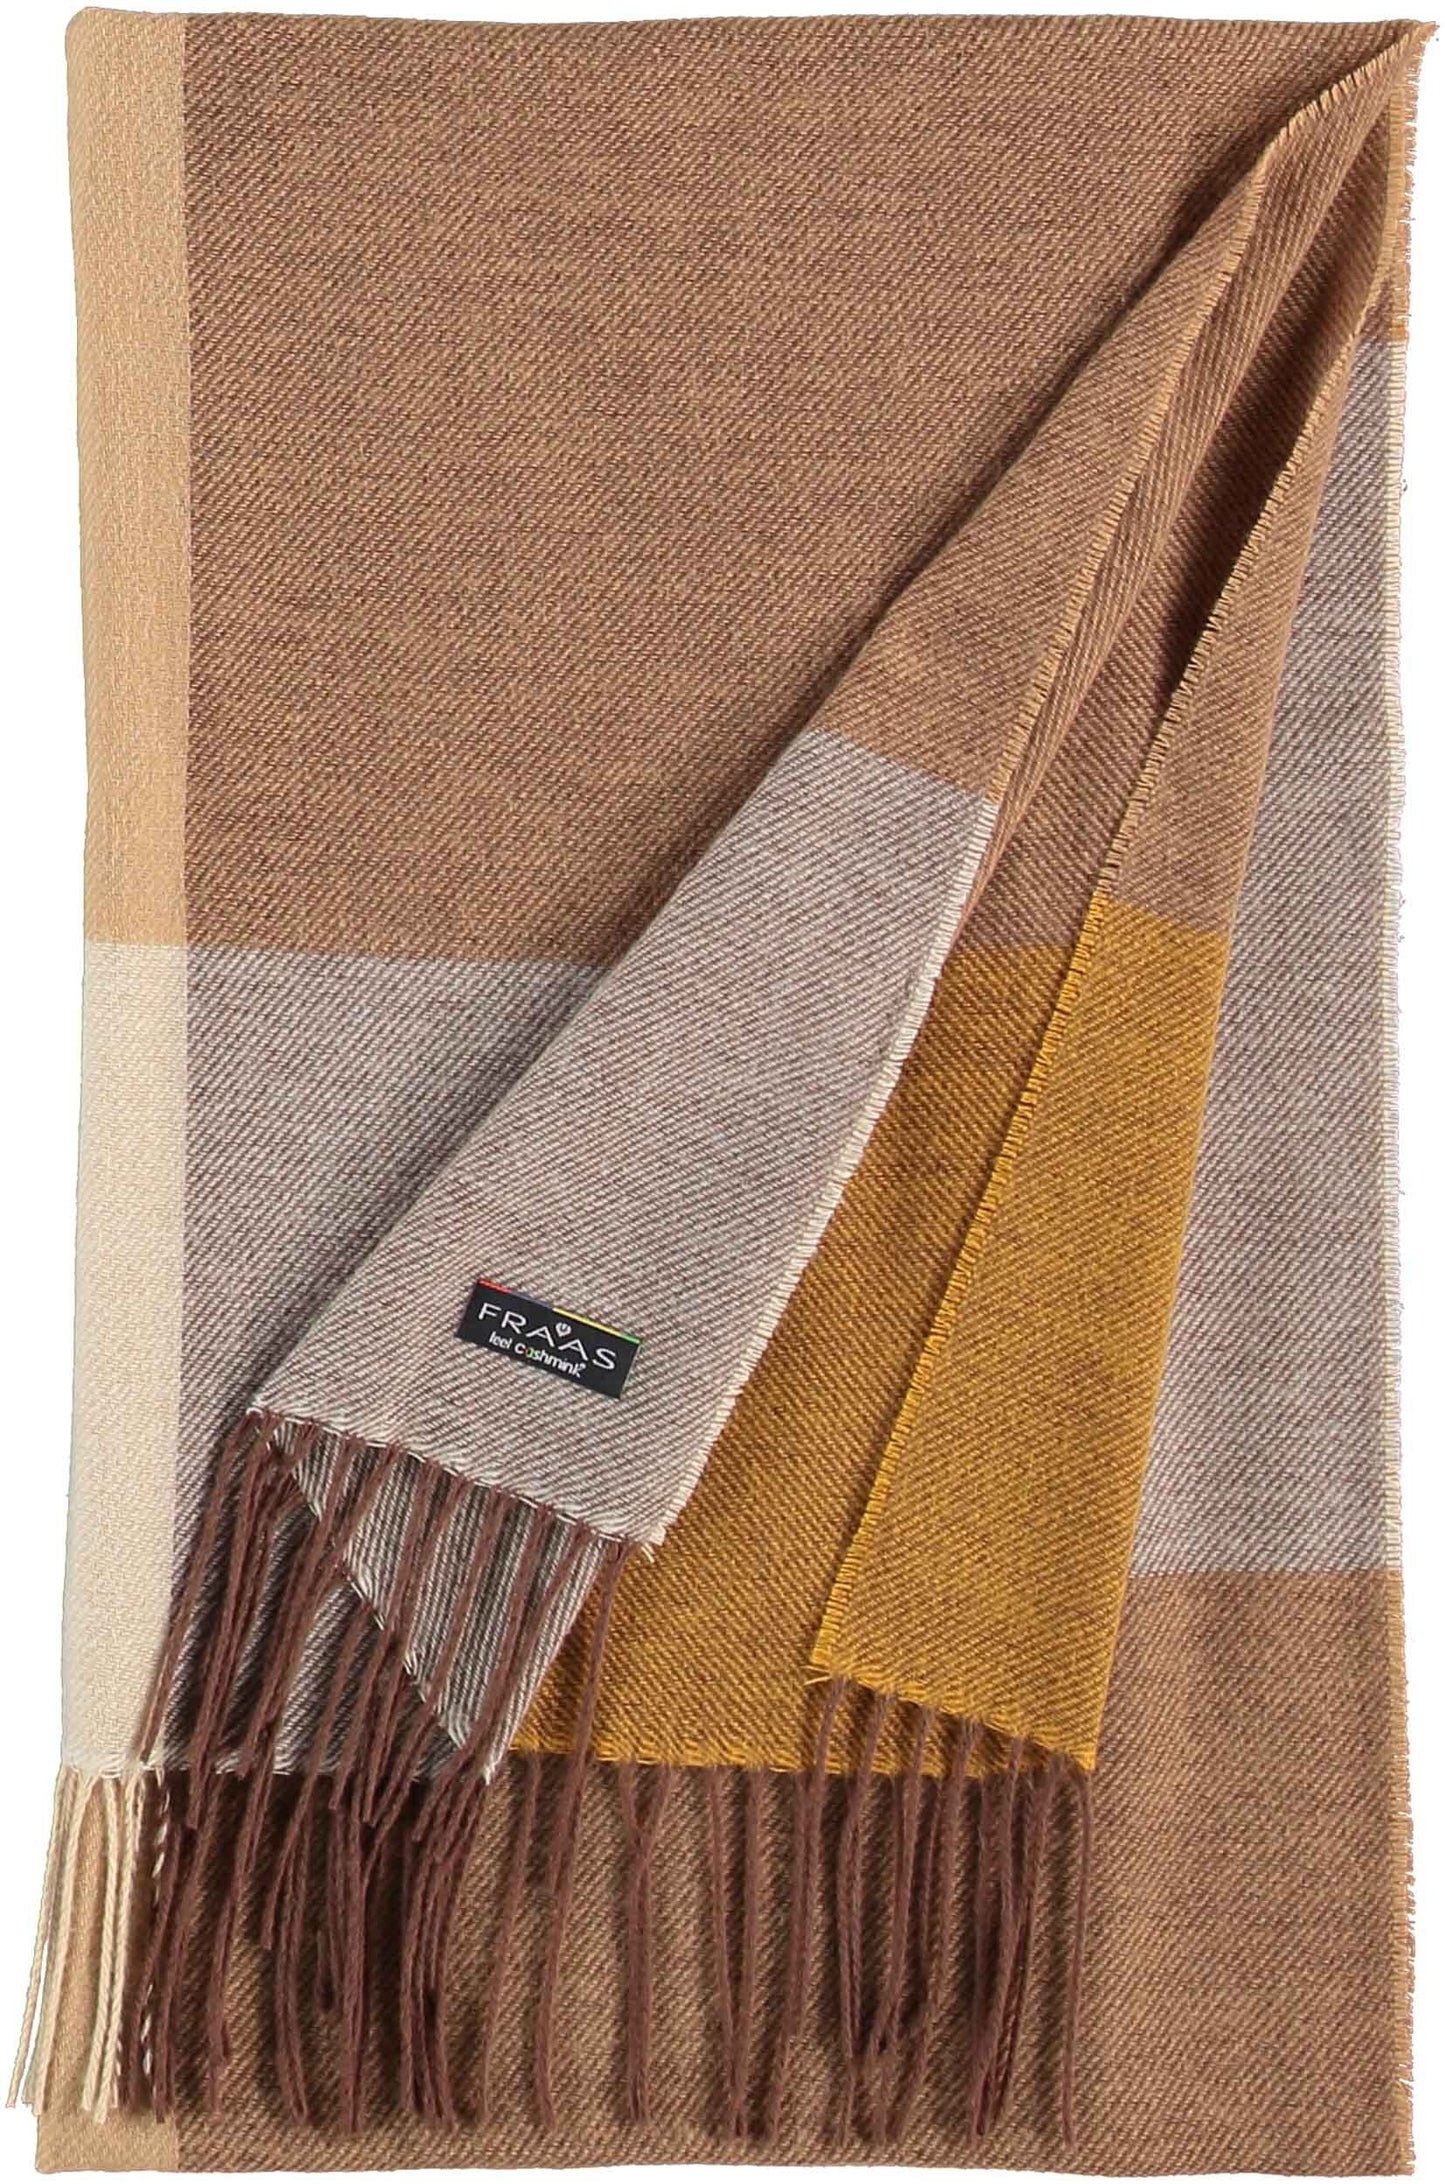 FRAAS Sustainability Edition Box Check Oversized Scarf